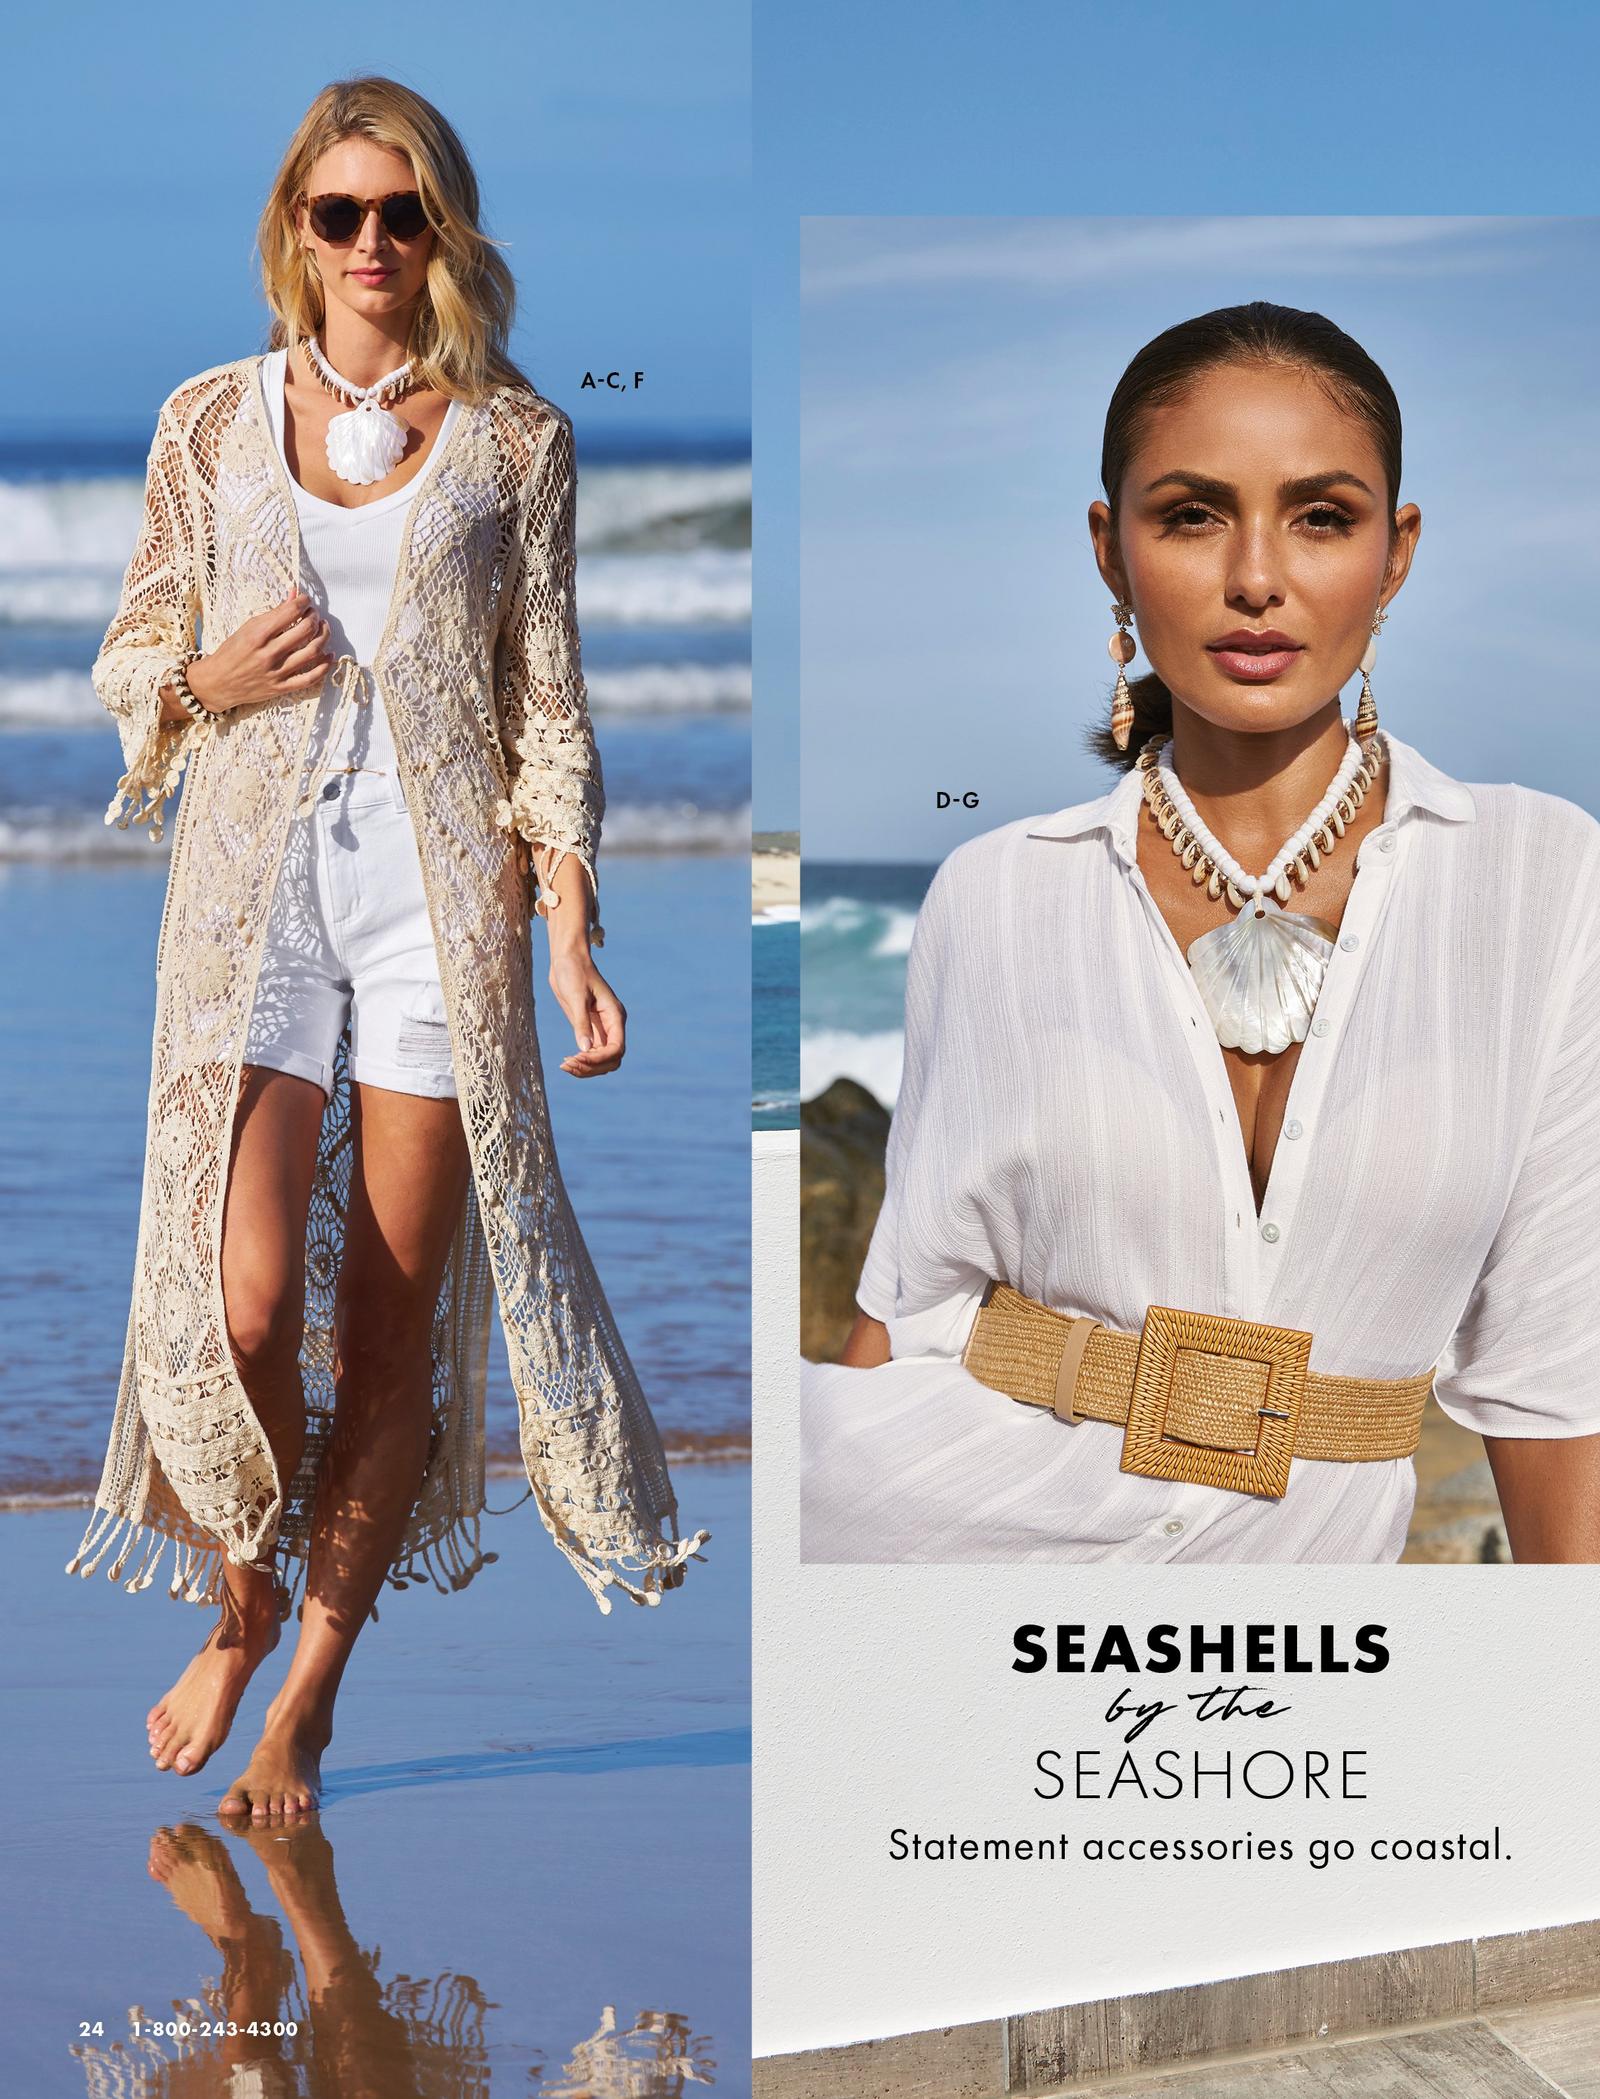 left model wearing oatmeal colored crochet duster, white tank top, white denim jeans, sunglasses, and a while seashell necklace. right model wearing a white seashell necklace, seashell earrings, white short sleeve top, and raffia belt.